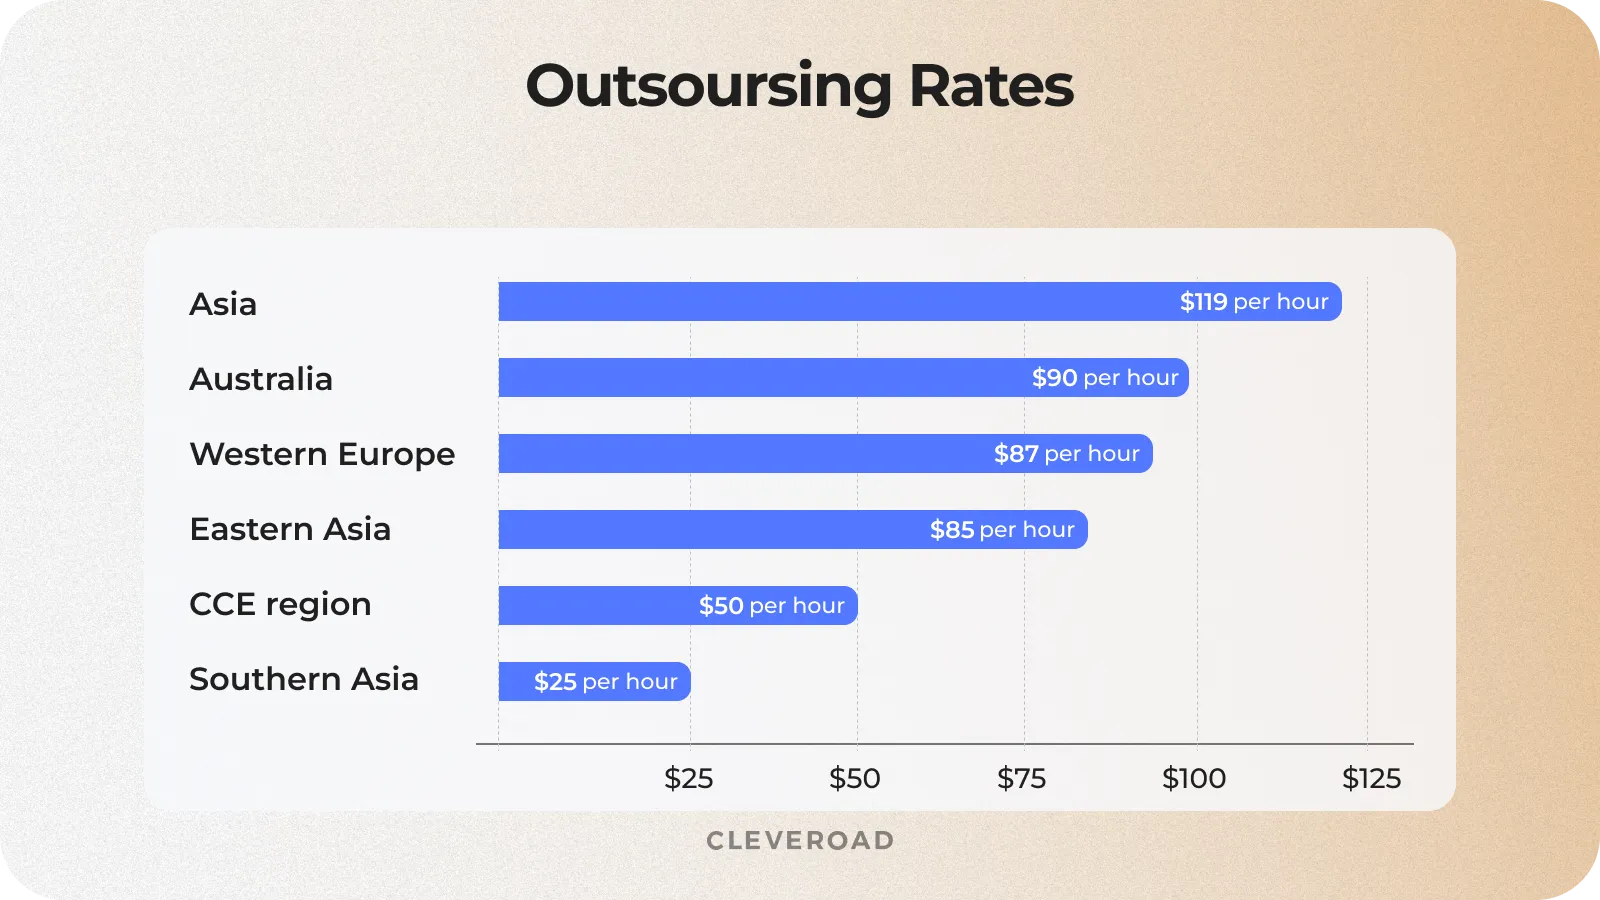 Outsourcing rates